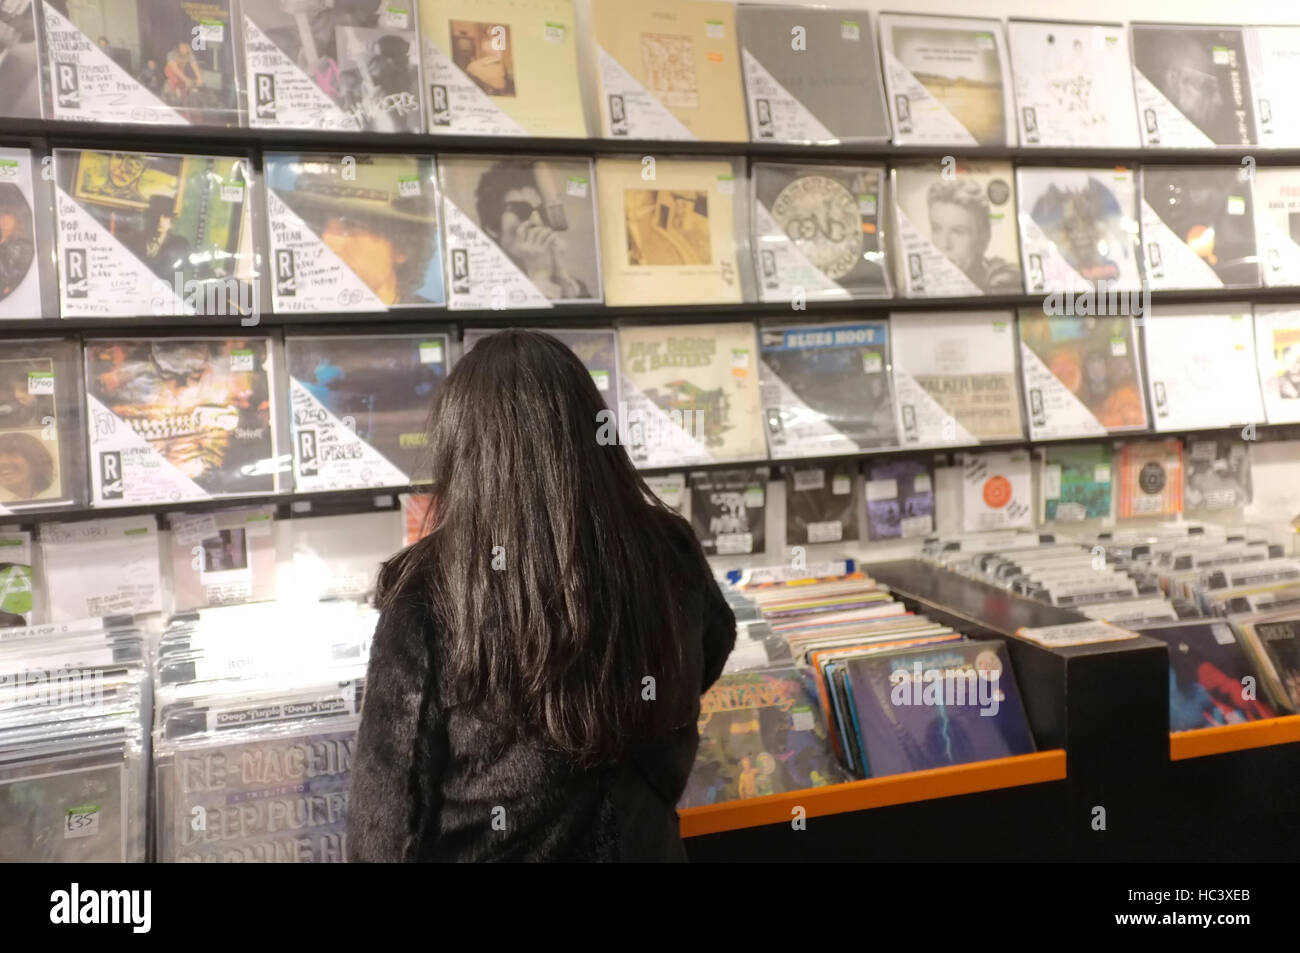 Japanese music fan looking at records in a London second-hand record shop. Stock Photo